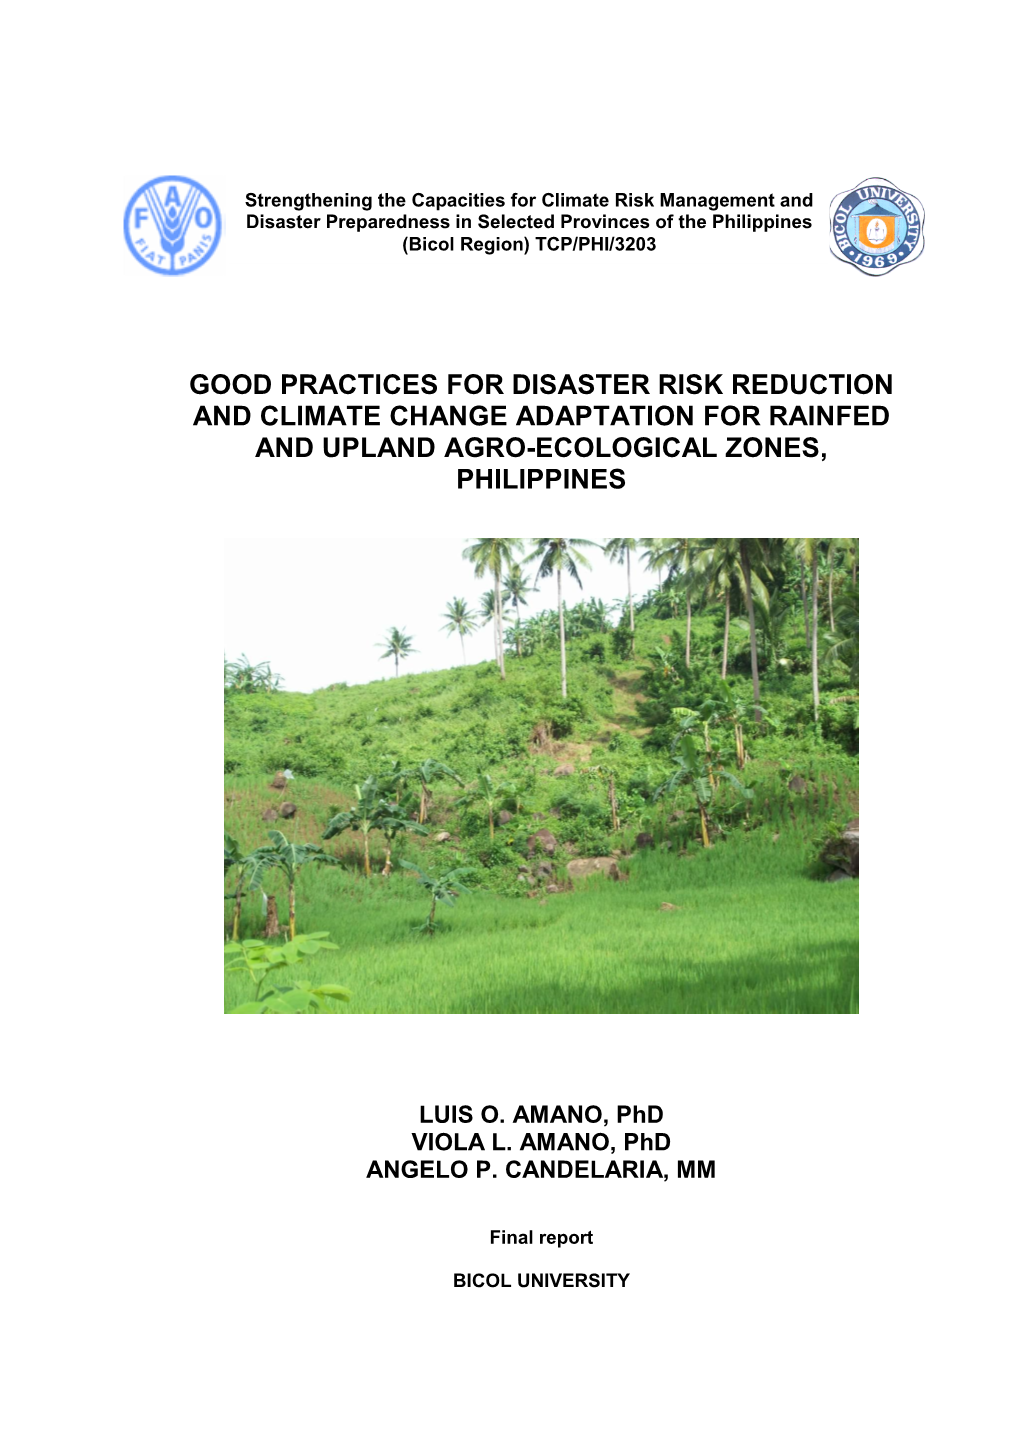 Good Practices for Disaster Risk Reduction and Climate Change Adaptation for Rainfed and Upland Agro-Ecological Zones, Philippines